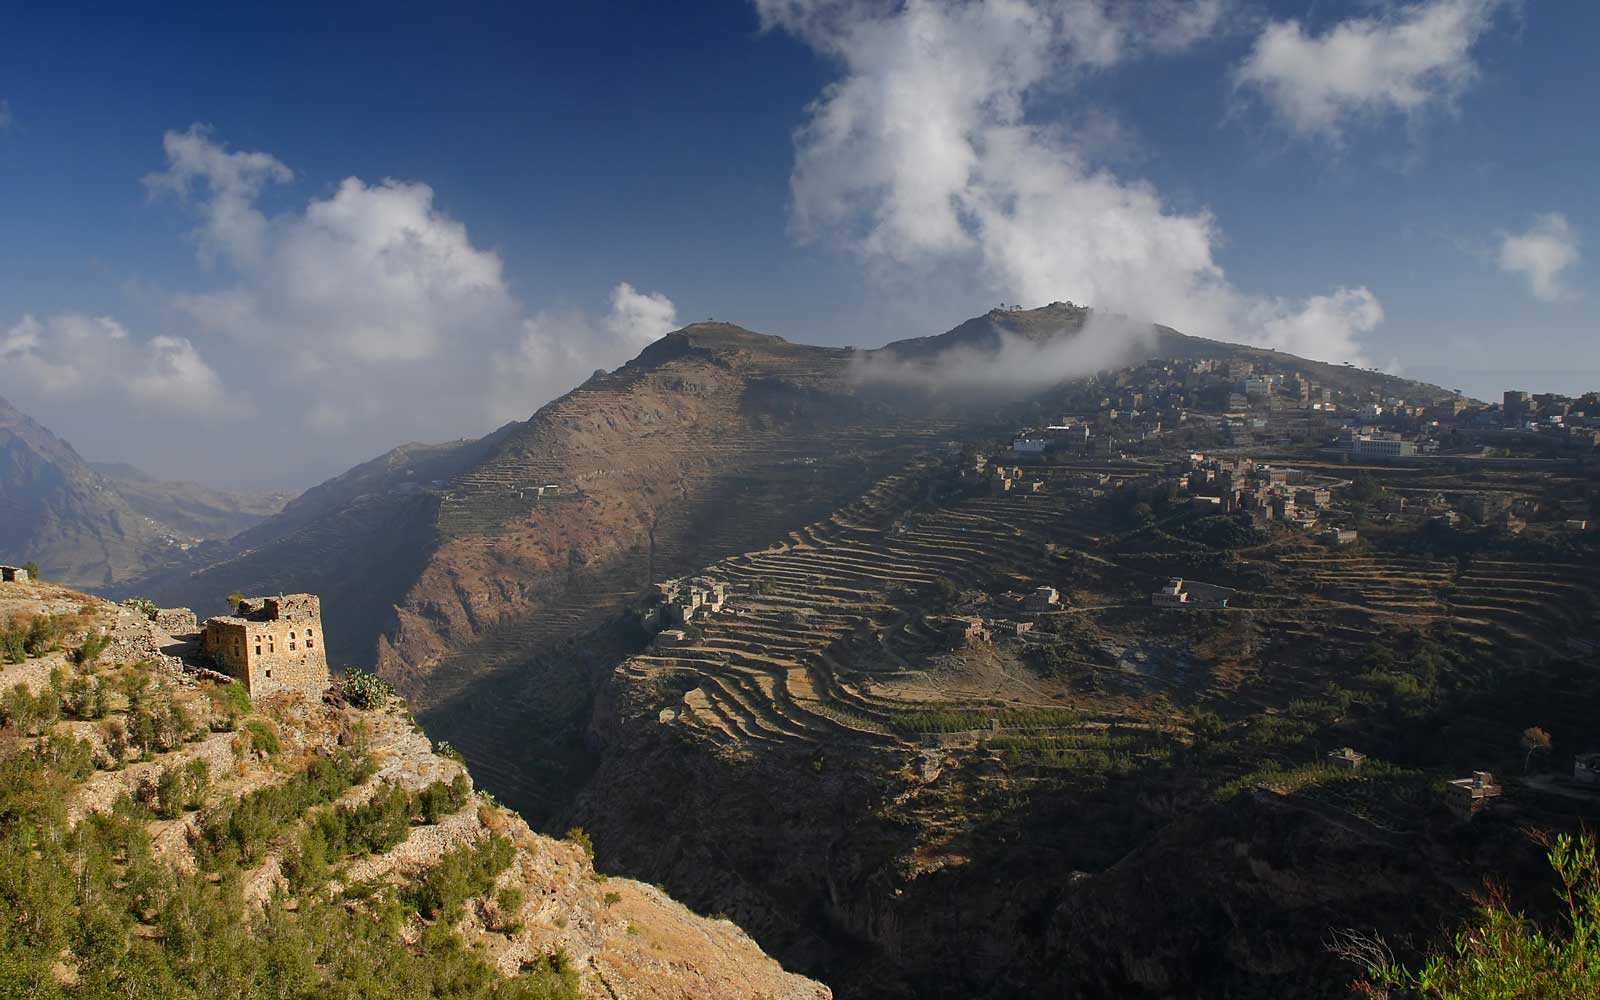 Yemen coffee terraces reaching into the clouds